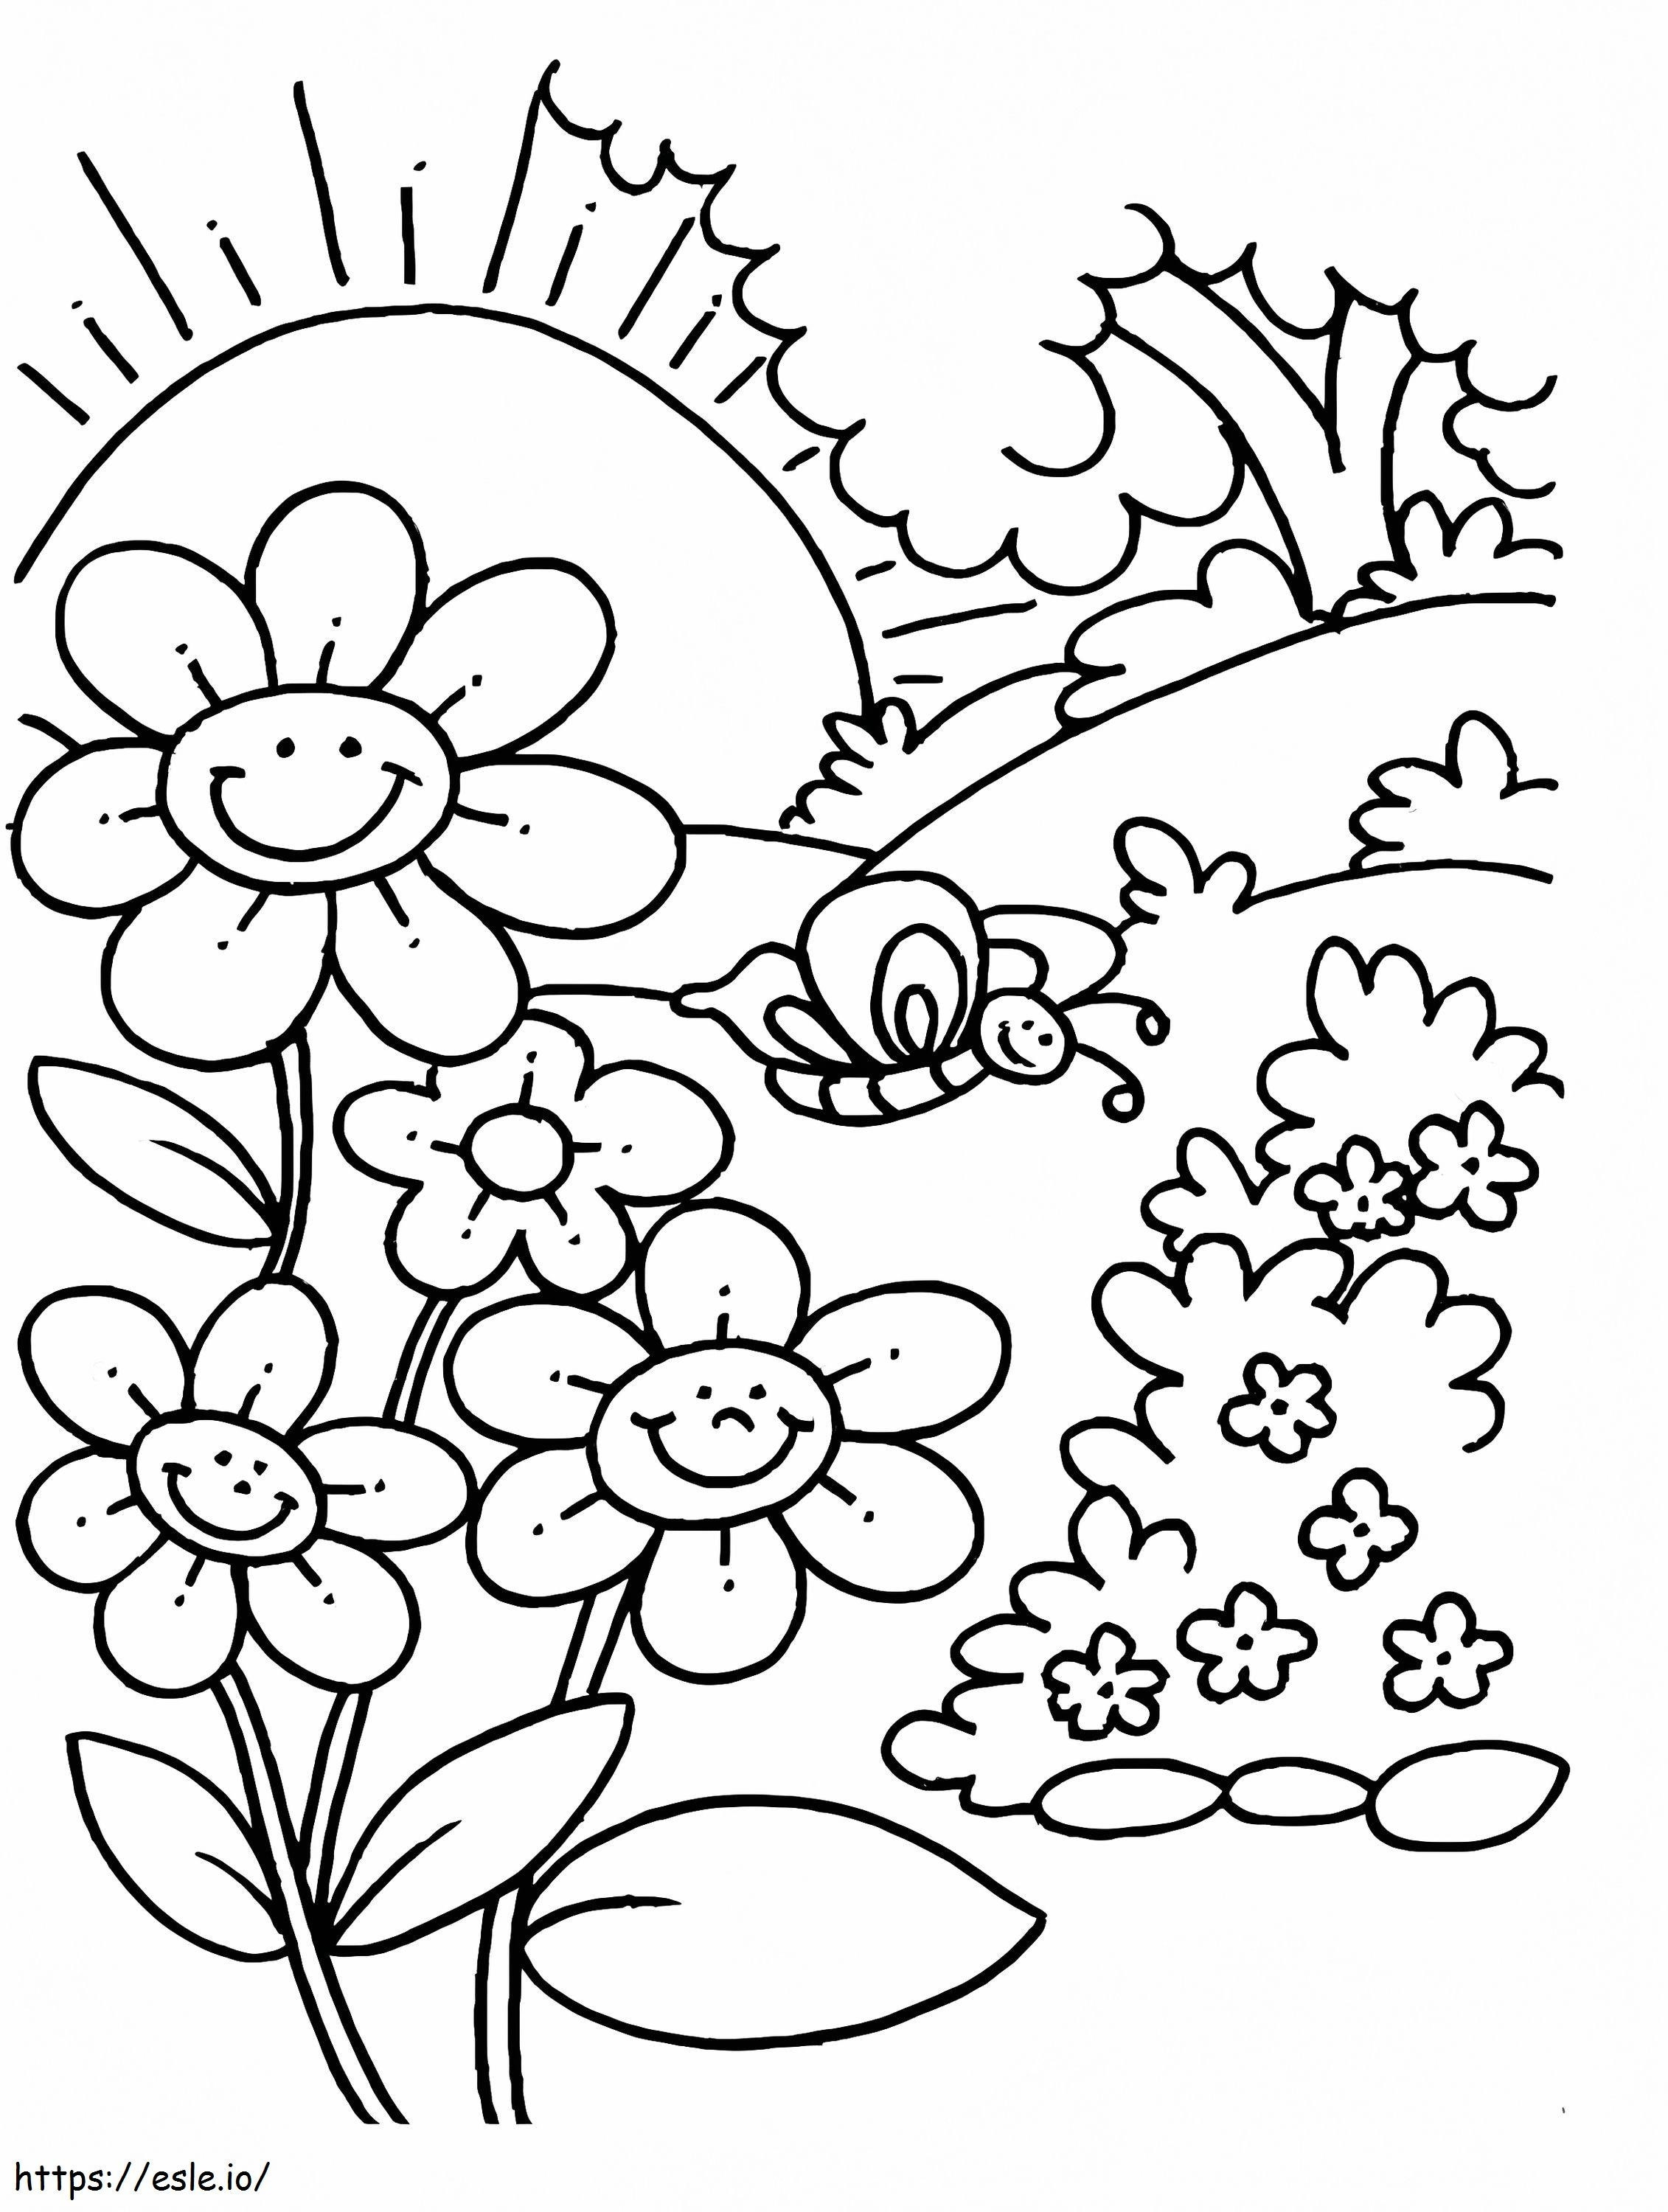 Basic Spring coloring page